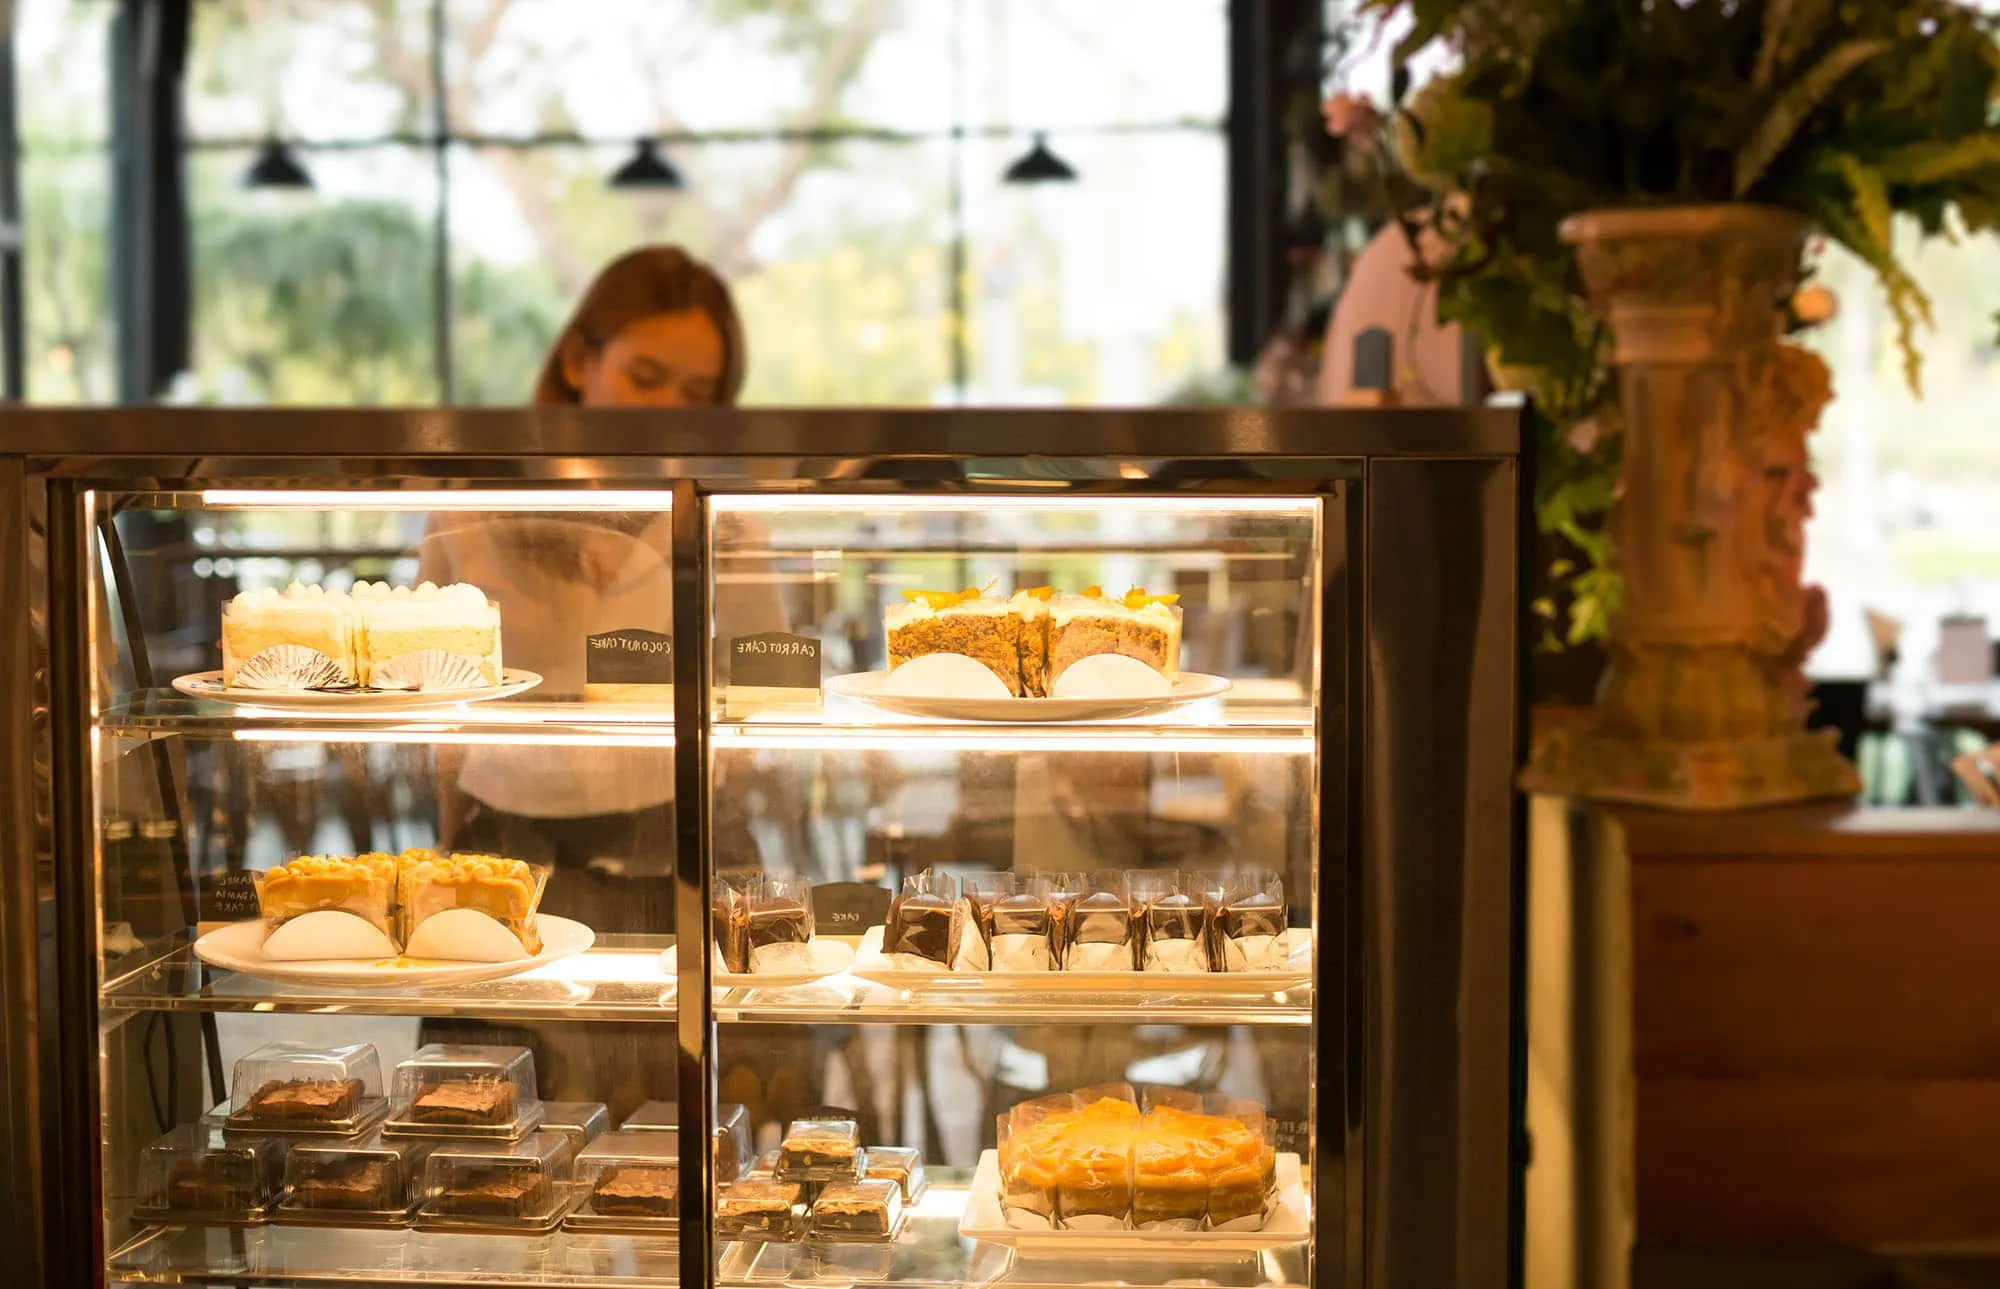 Woman selecting a pastry from a display fridge in a coffee shop